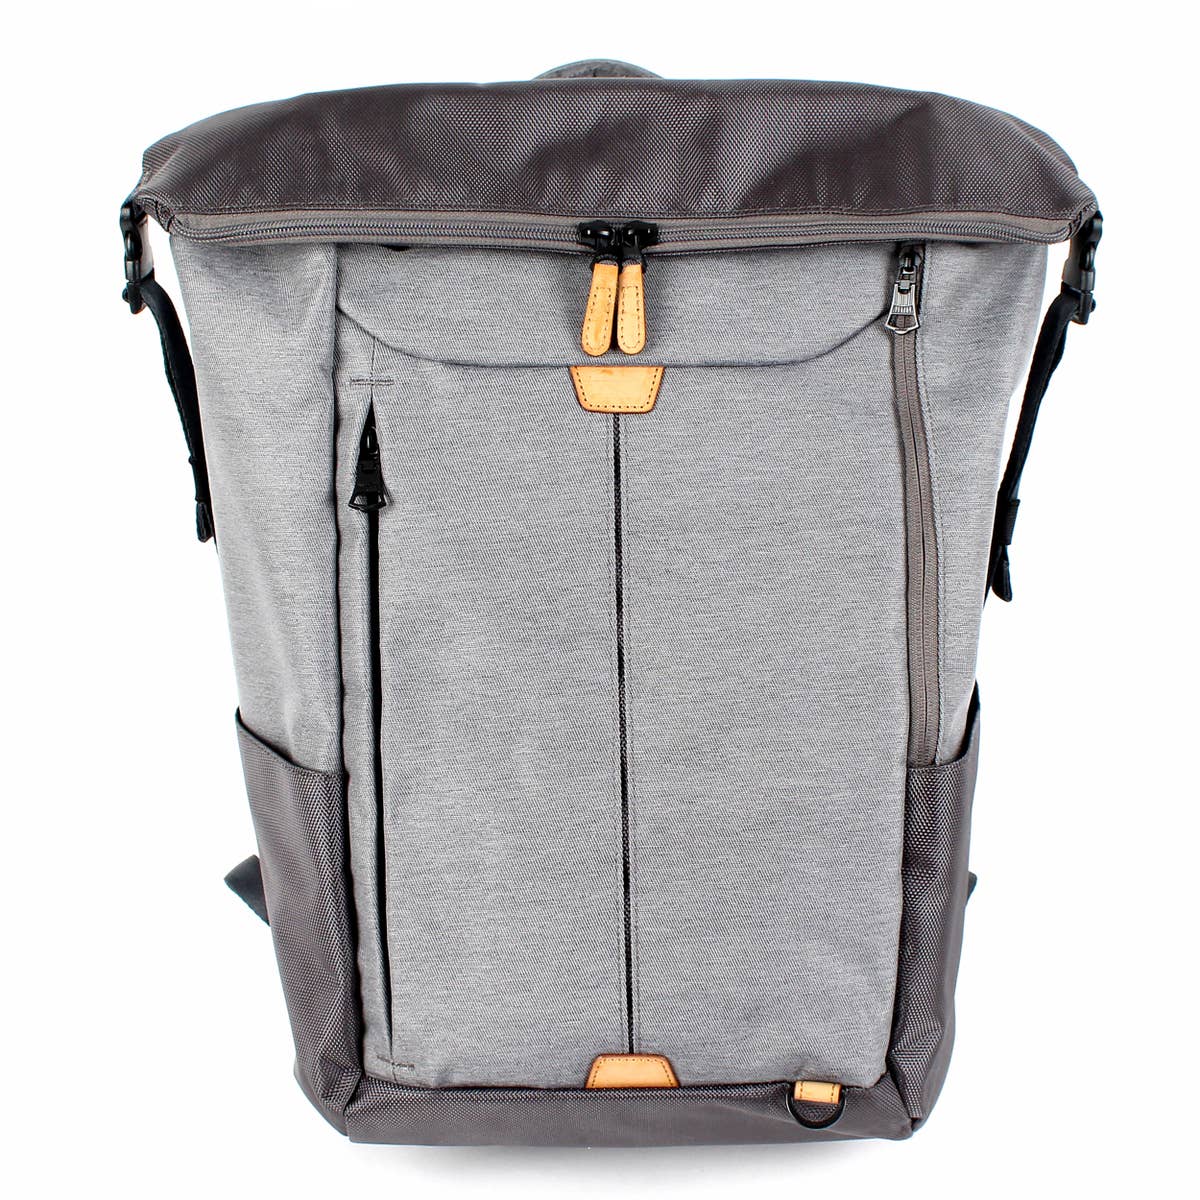 Harvest Label | Axis Travel Backpack with Roll Top Opening - Light Grey, Backpacks, Harvest Label, Defiance Outdoor Gear Co.